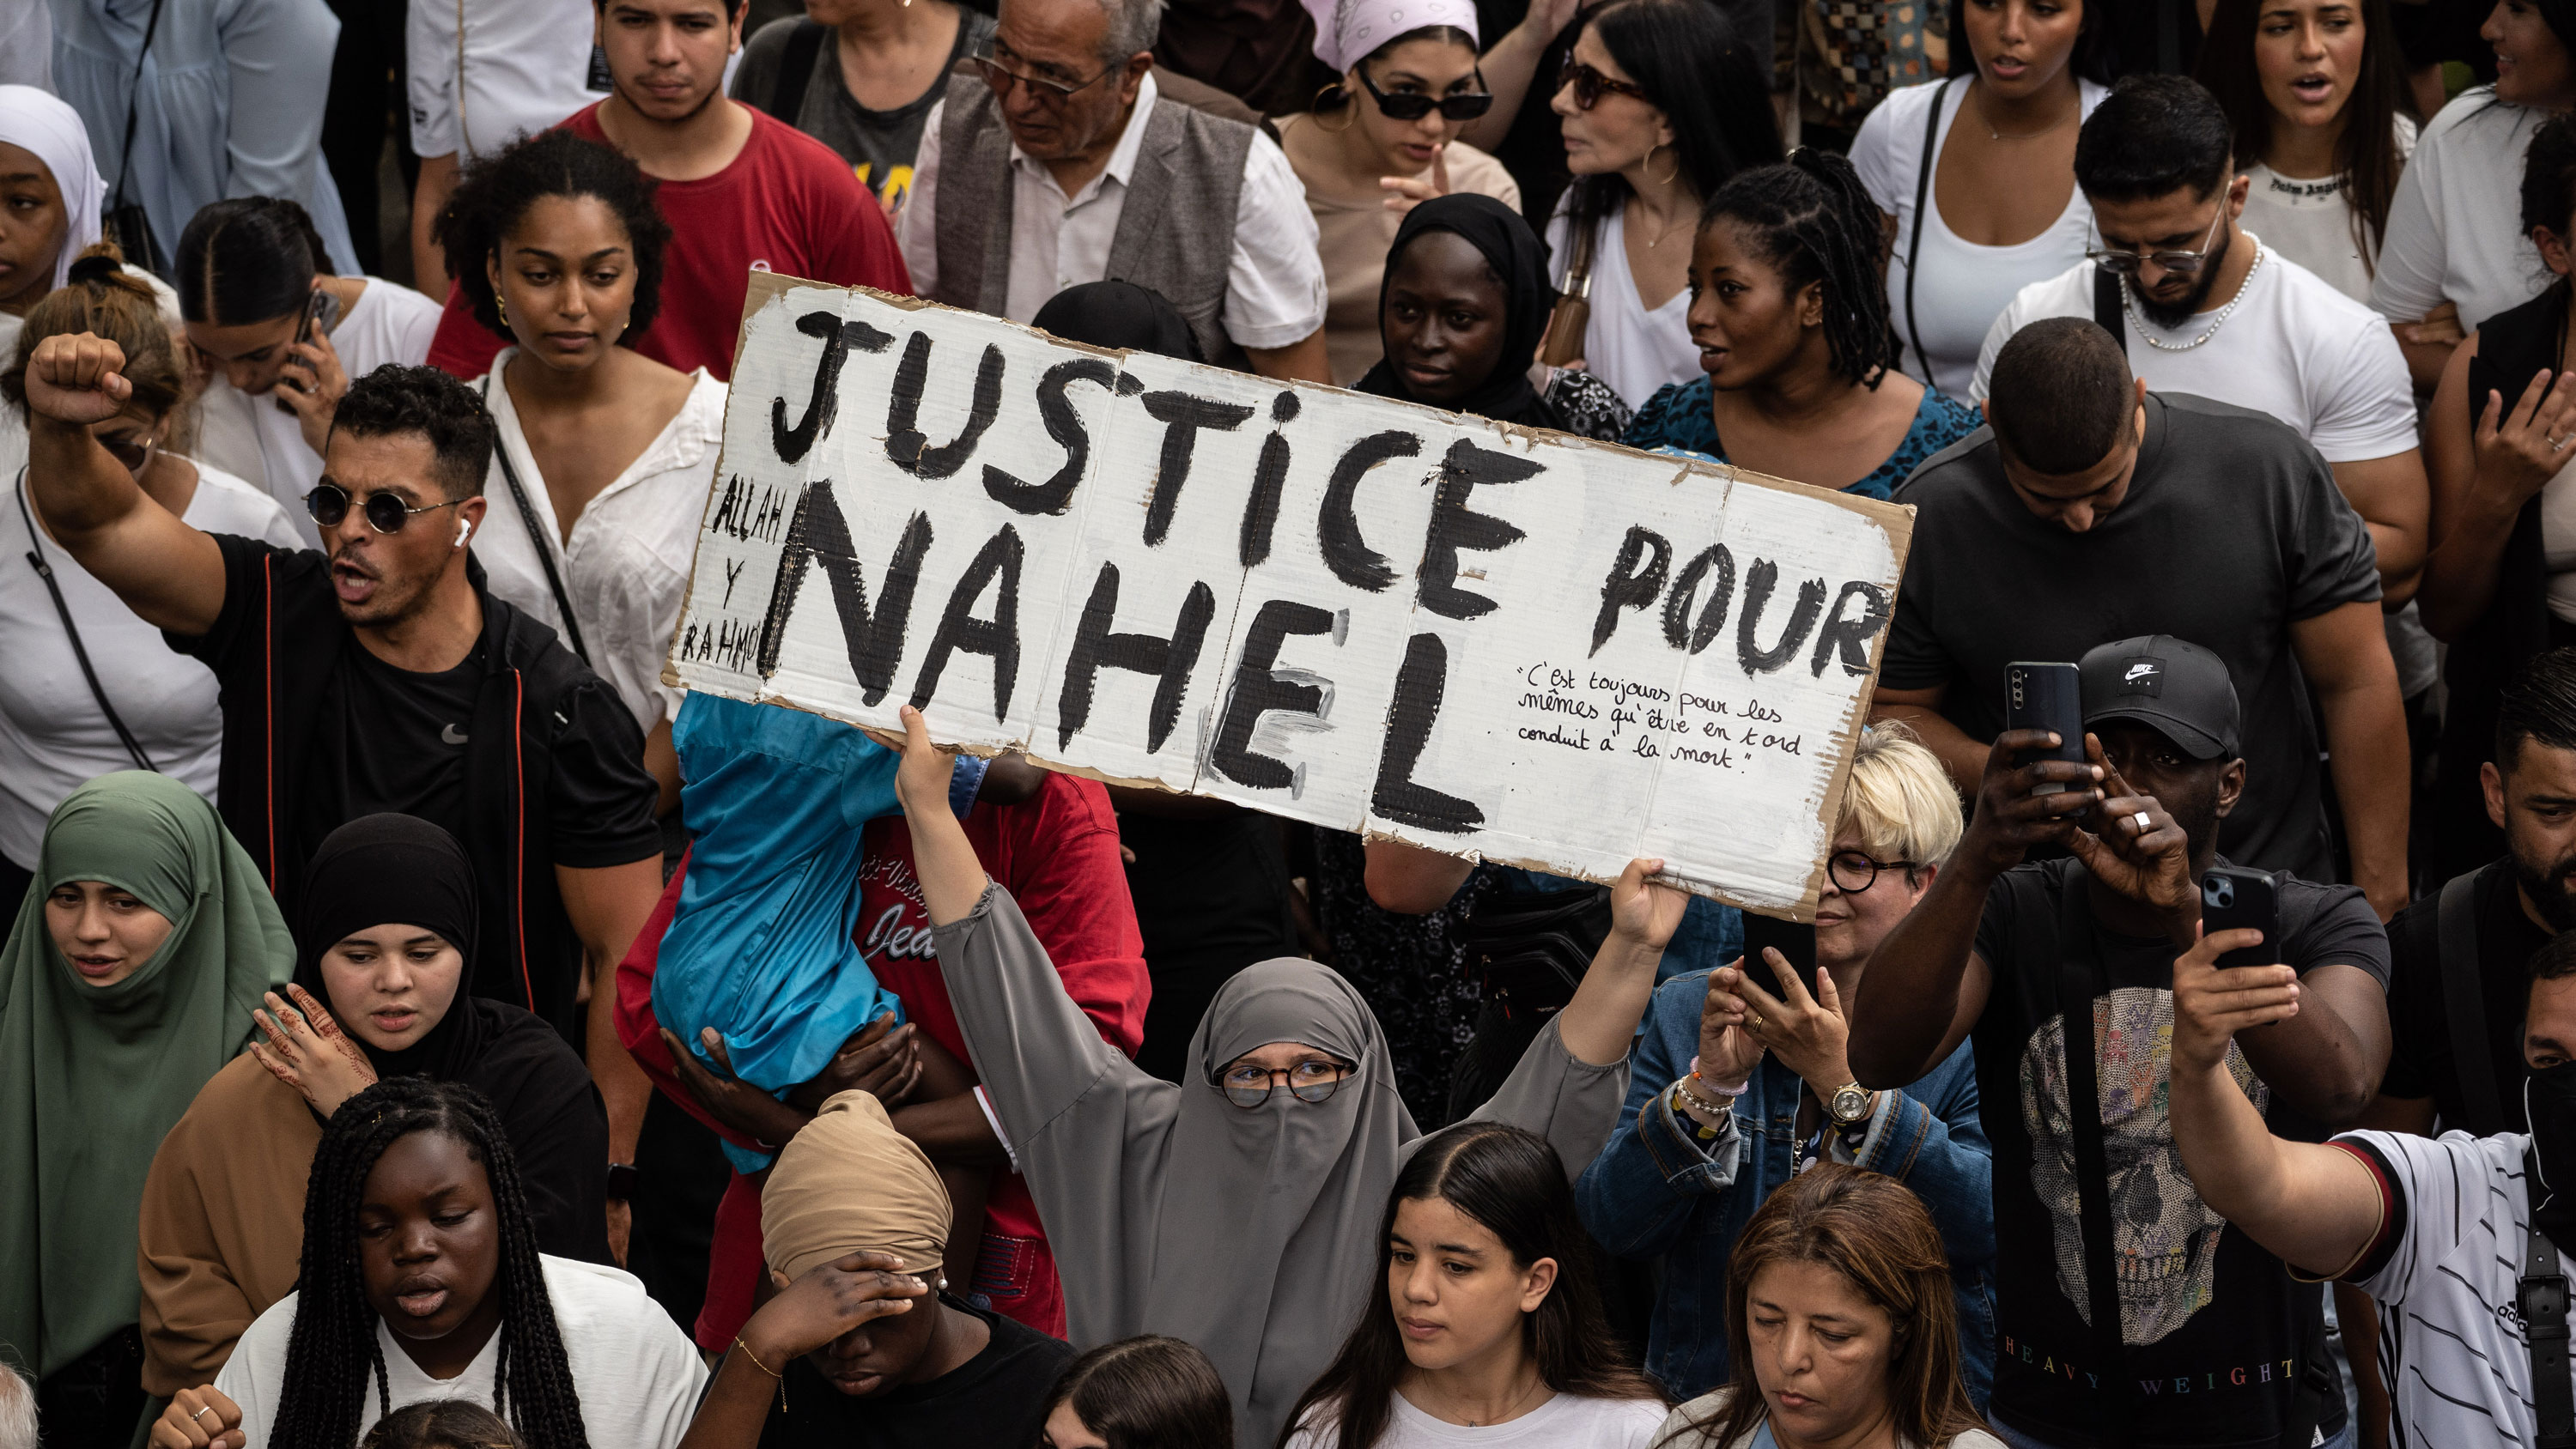 Nahel's France: Neo-Colonized and Pan-African Voices Speak Up